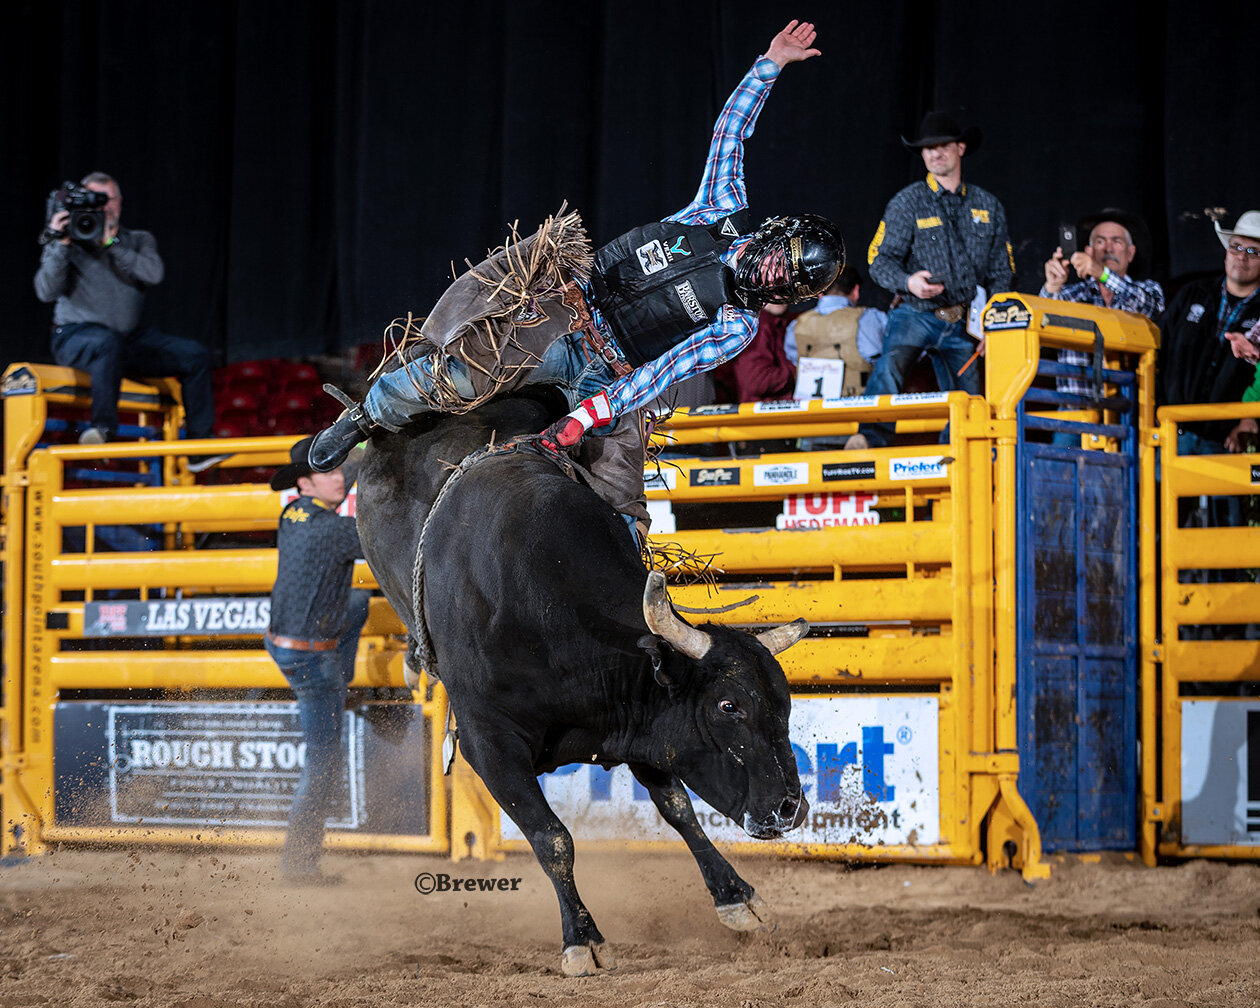 NFR Bull Rider Profile Boudreaux Campbell — Tuff Hedeman Bull Riding